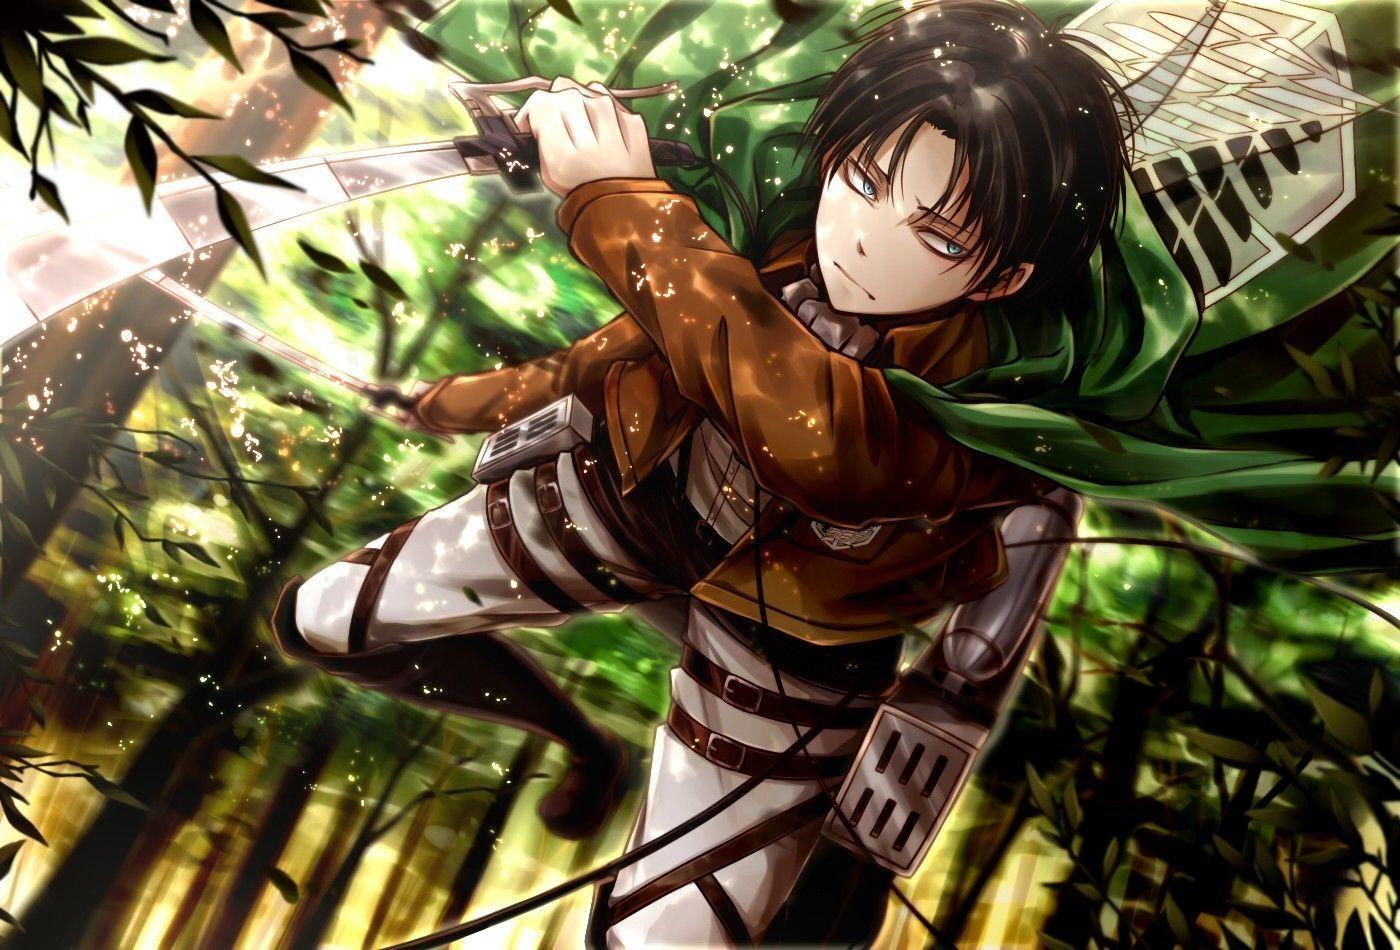 Featured image of post Anime Wallpapers Attack On Titan Levi : Attack on titan anime anime anime drawing styles iphone wallpaper manga anime anime wallpaper wallpaper anime drawings titans.